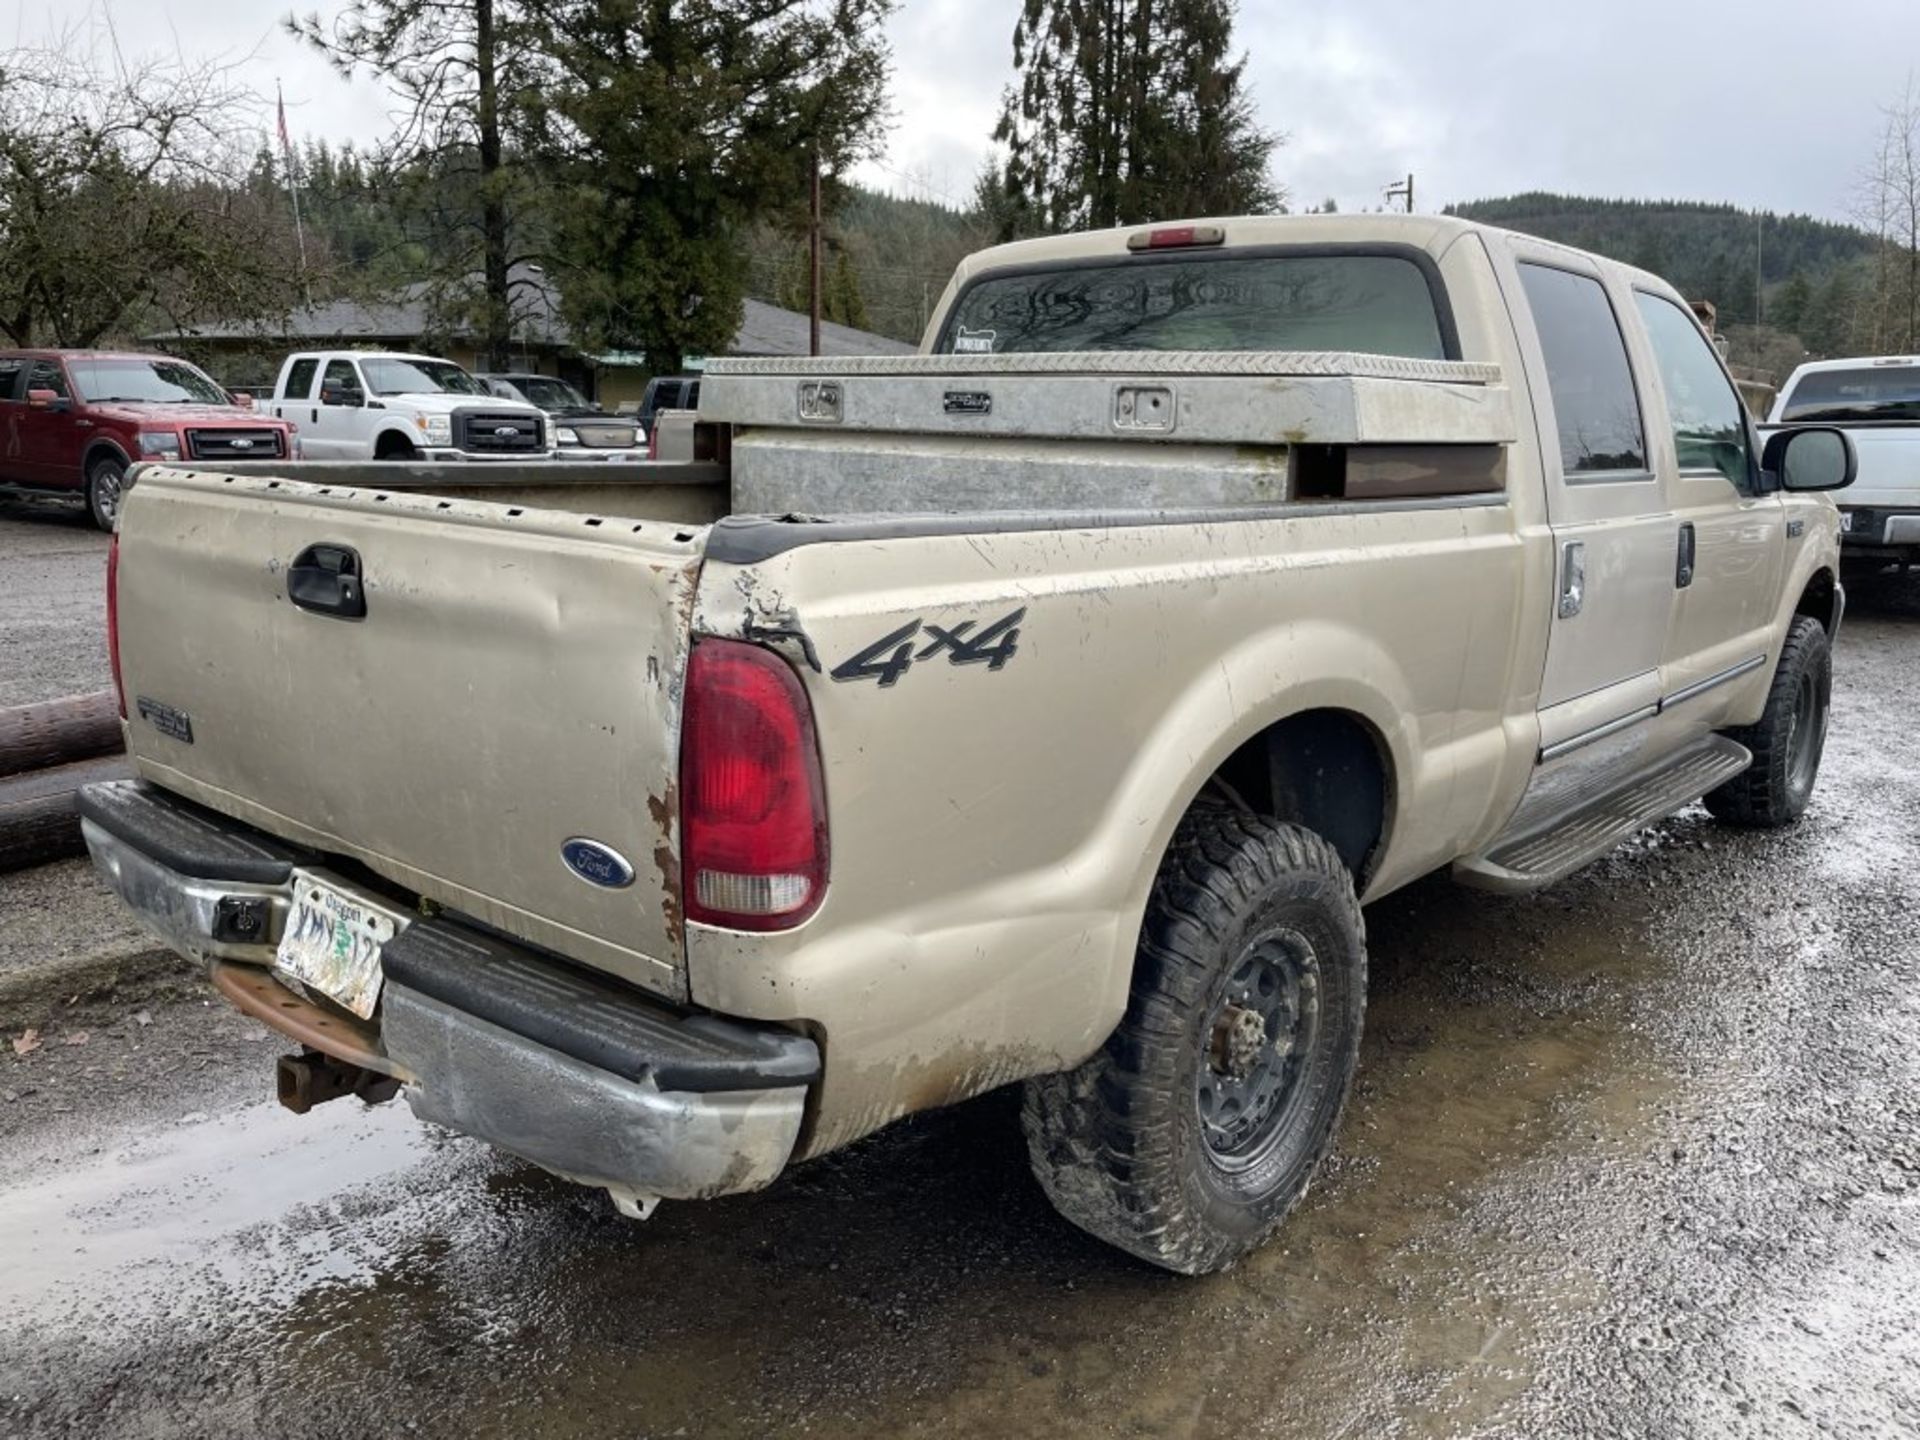 2000 Ford F250 SD 4x4 Crew Cab Pickup - Image 3 of 15